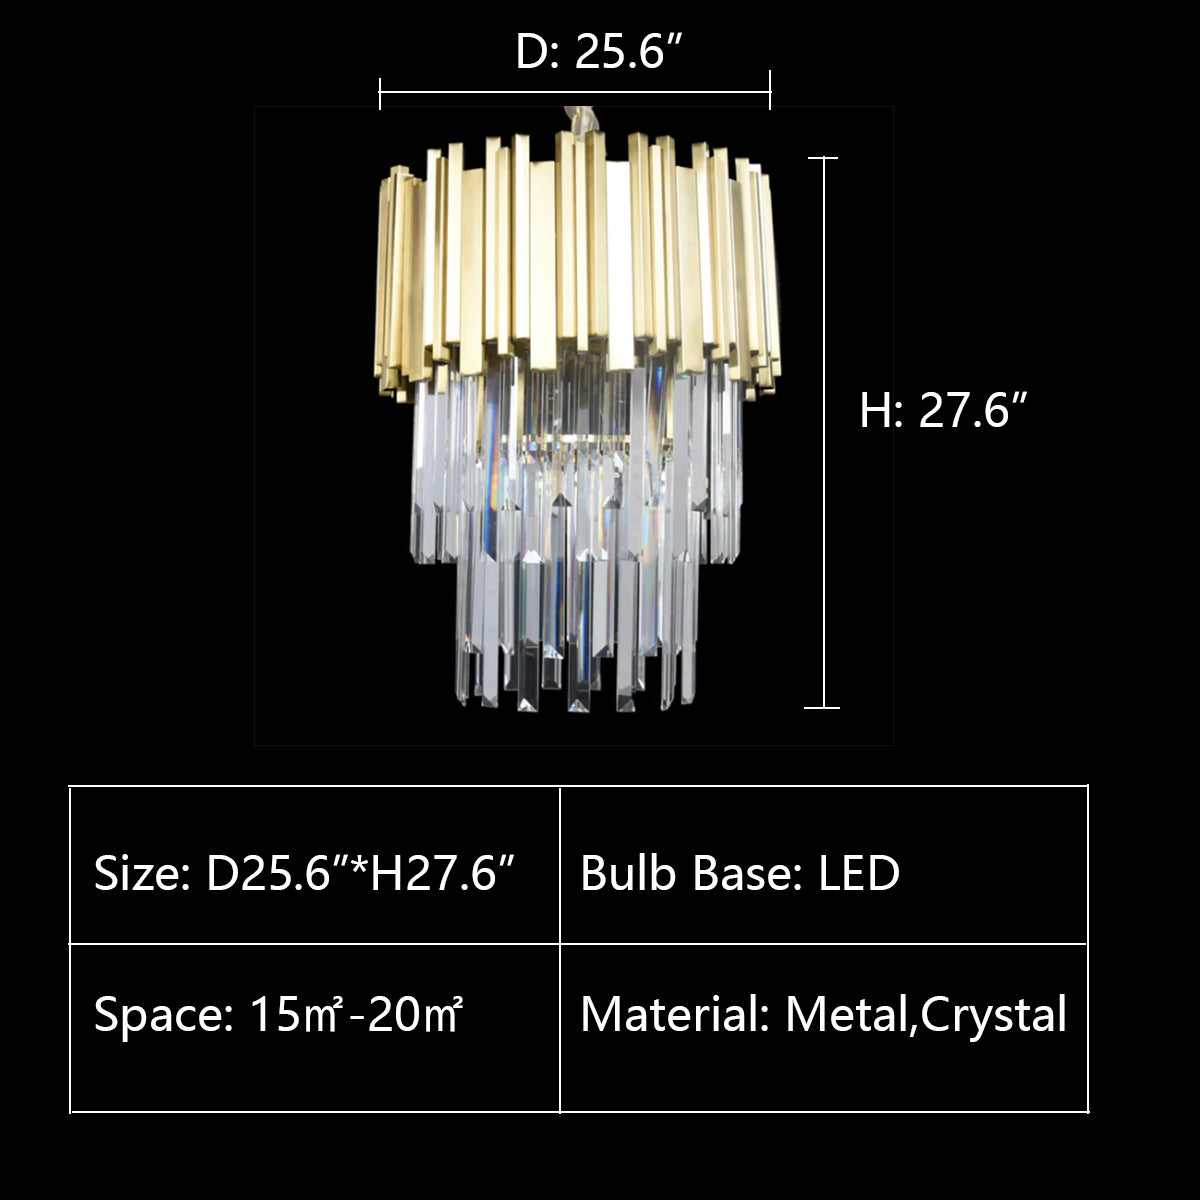 D25.6"*H27.6" Colonnade Tiered Round Crystal Chandelier,chandelier,chandeliers,round,cystal,metal.gold,brass,copper,tiers,layered,tiered,pendant,ceiling,light luxury,kitchen island,dining table,dining room,living room,bedroom,bar